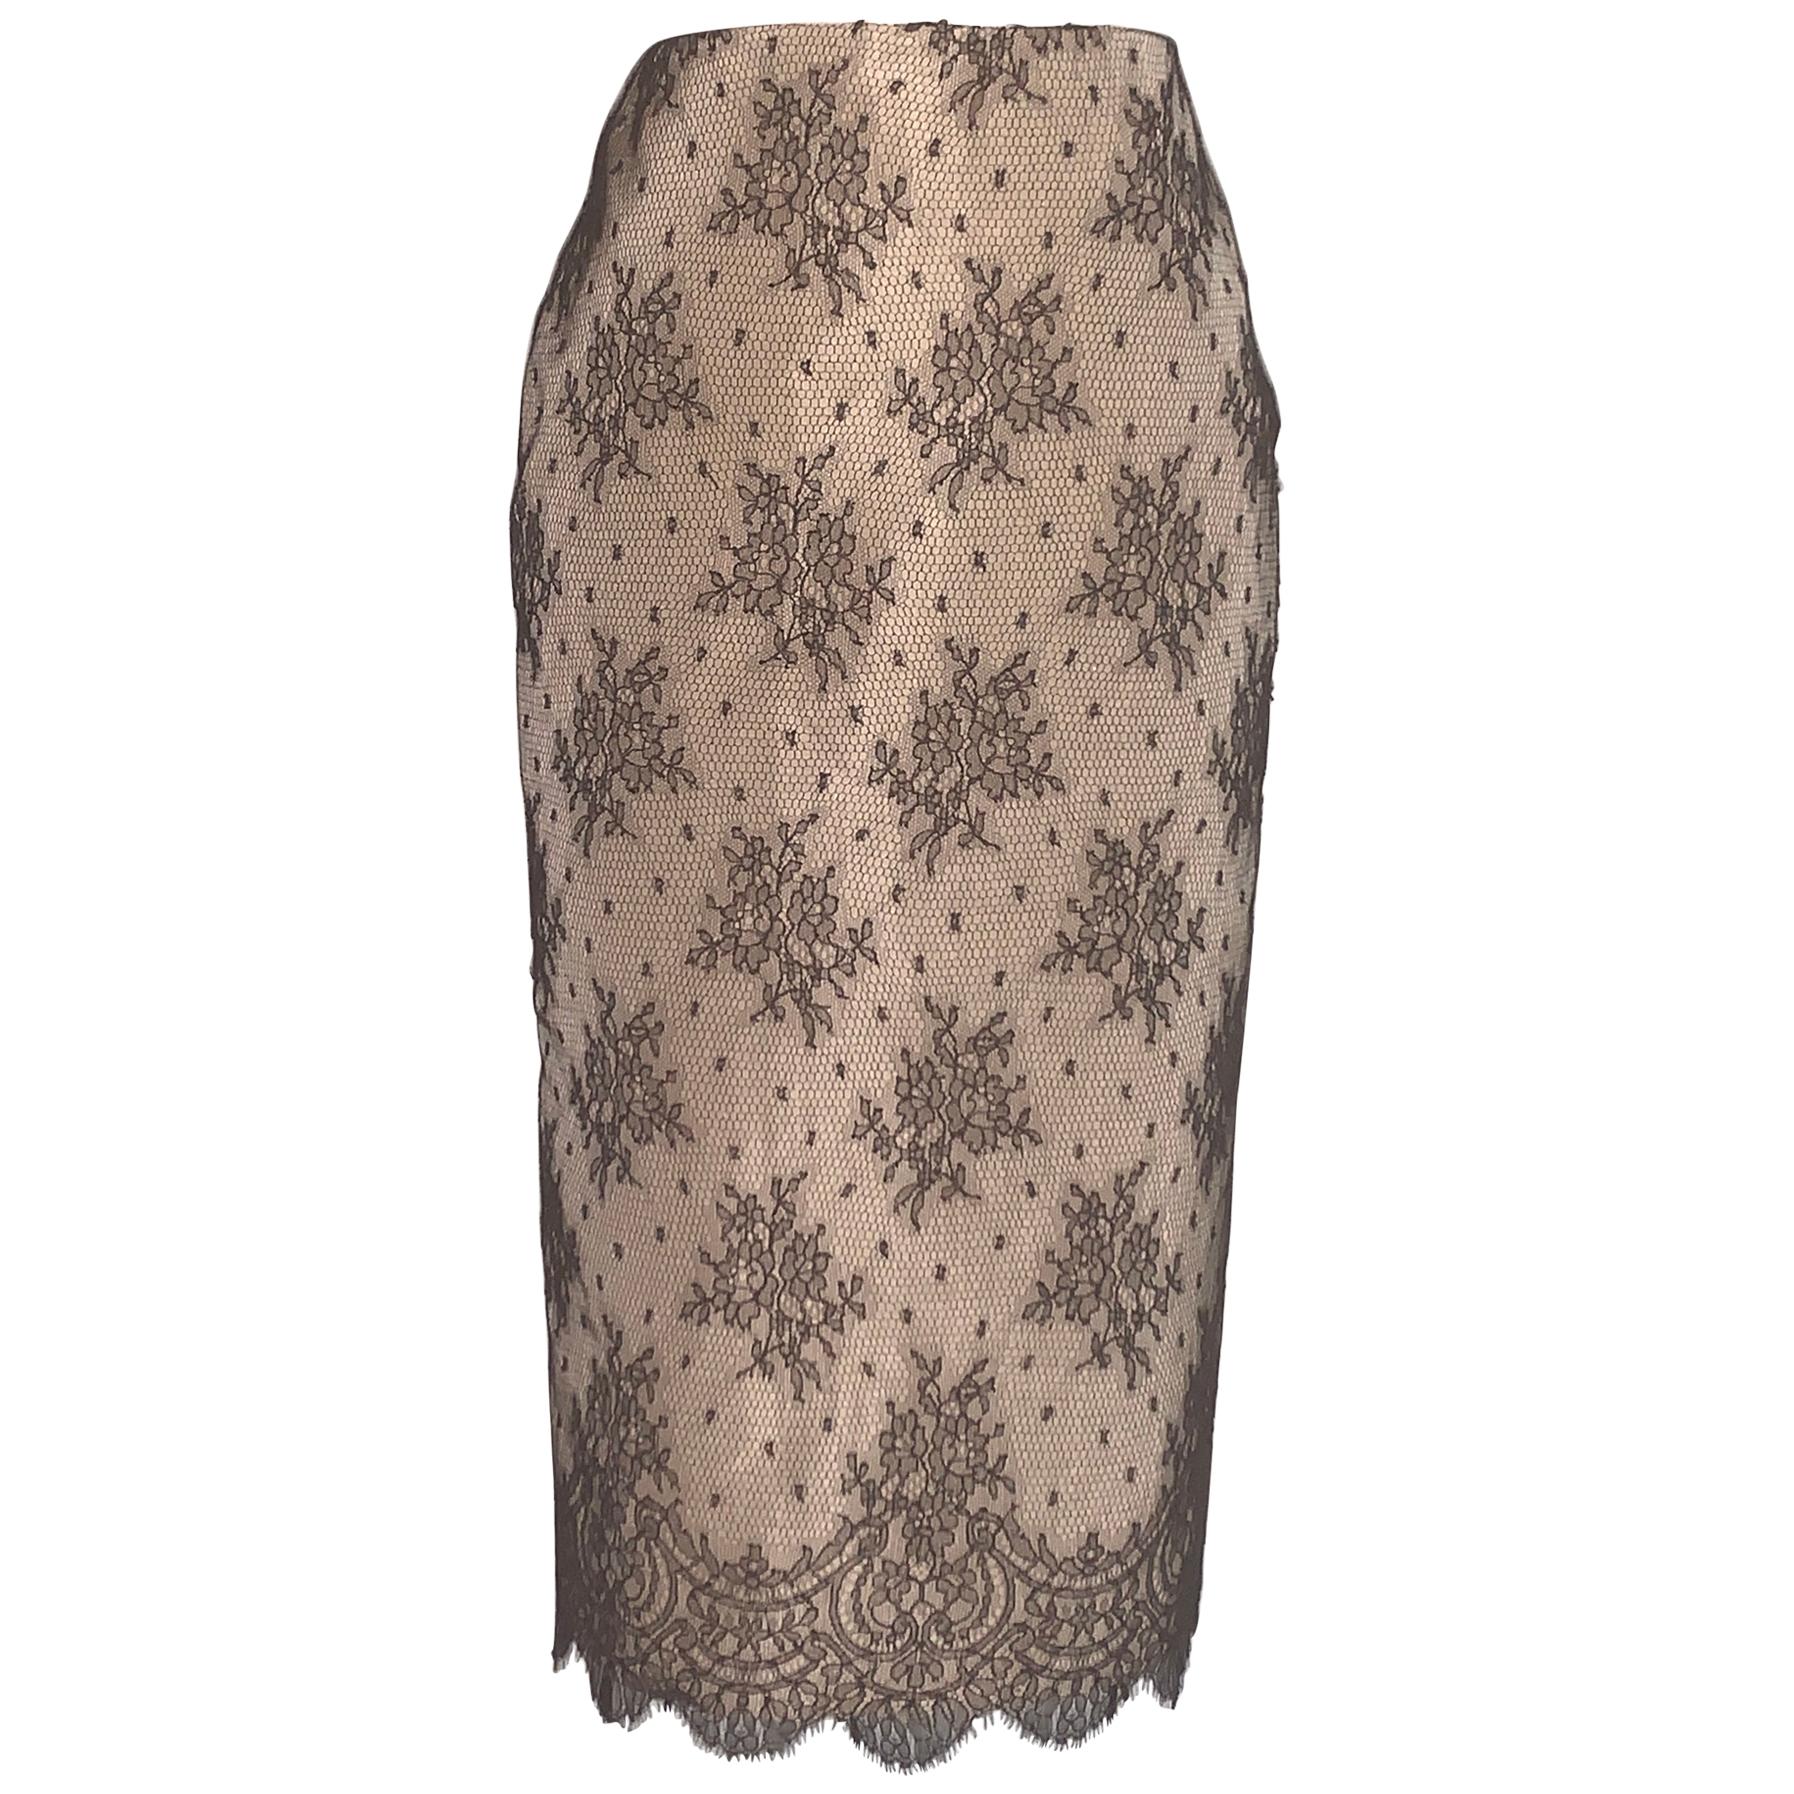 Unworn 2005 Alexander Mcqueen Nude Pencil Skirt with Black Floral Lace Overlay